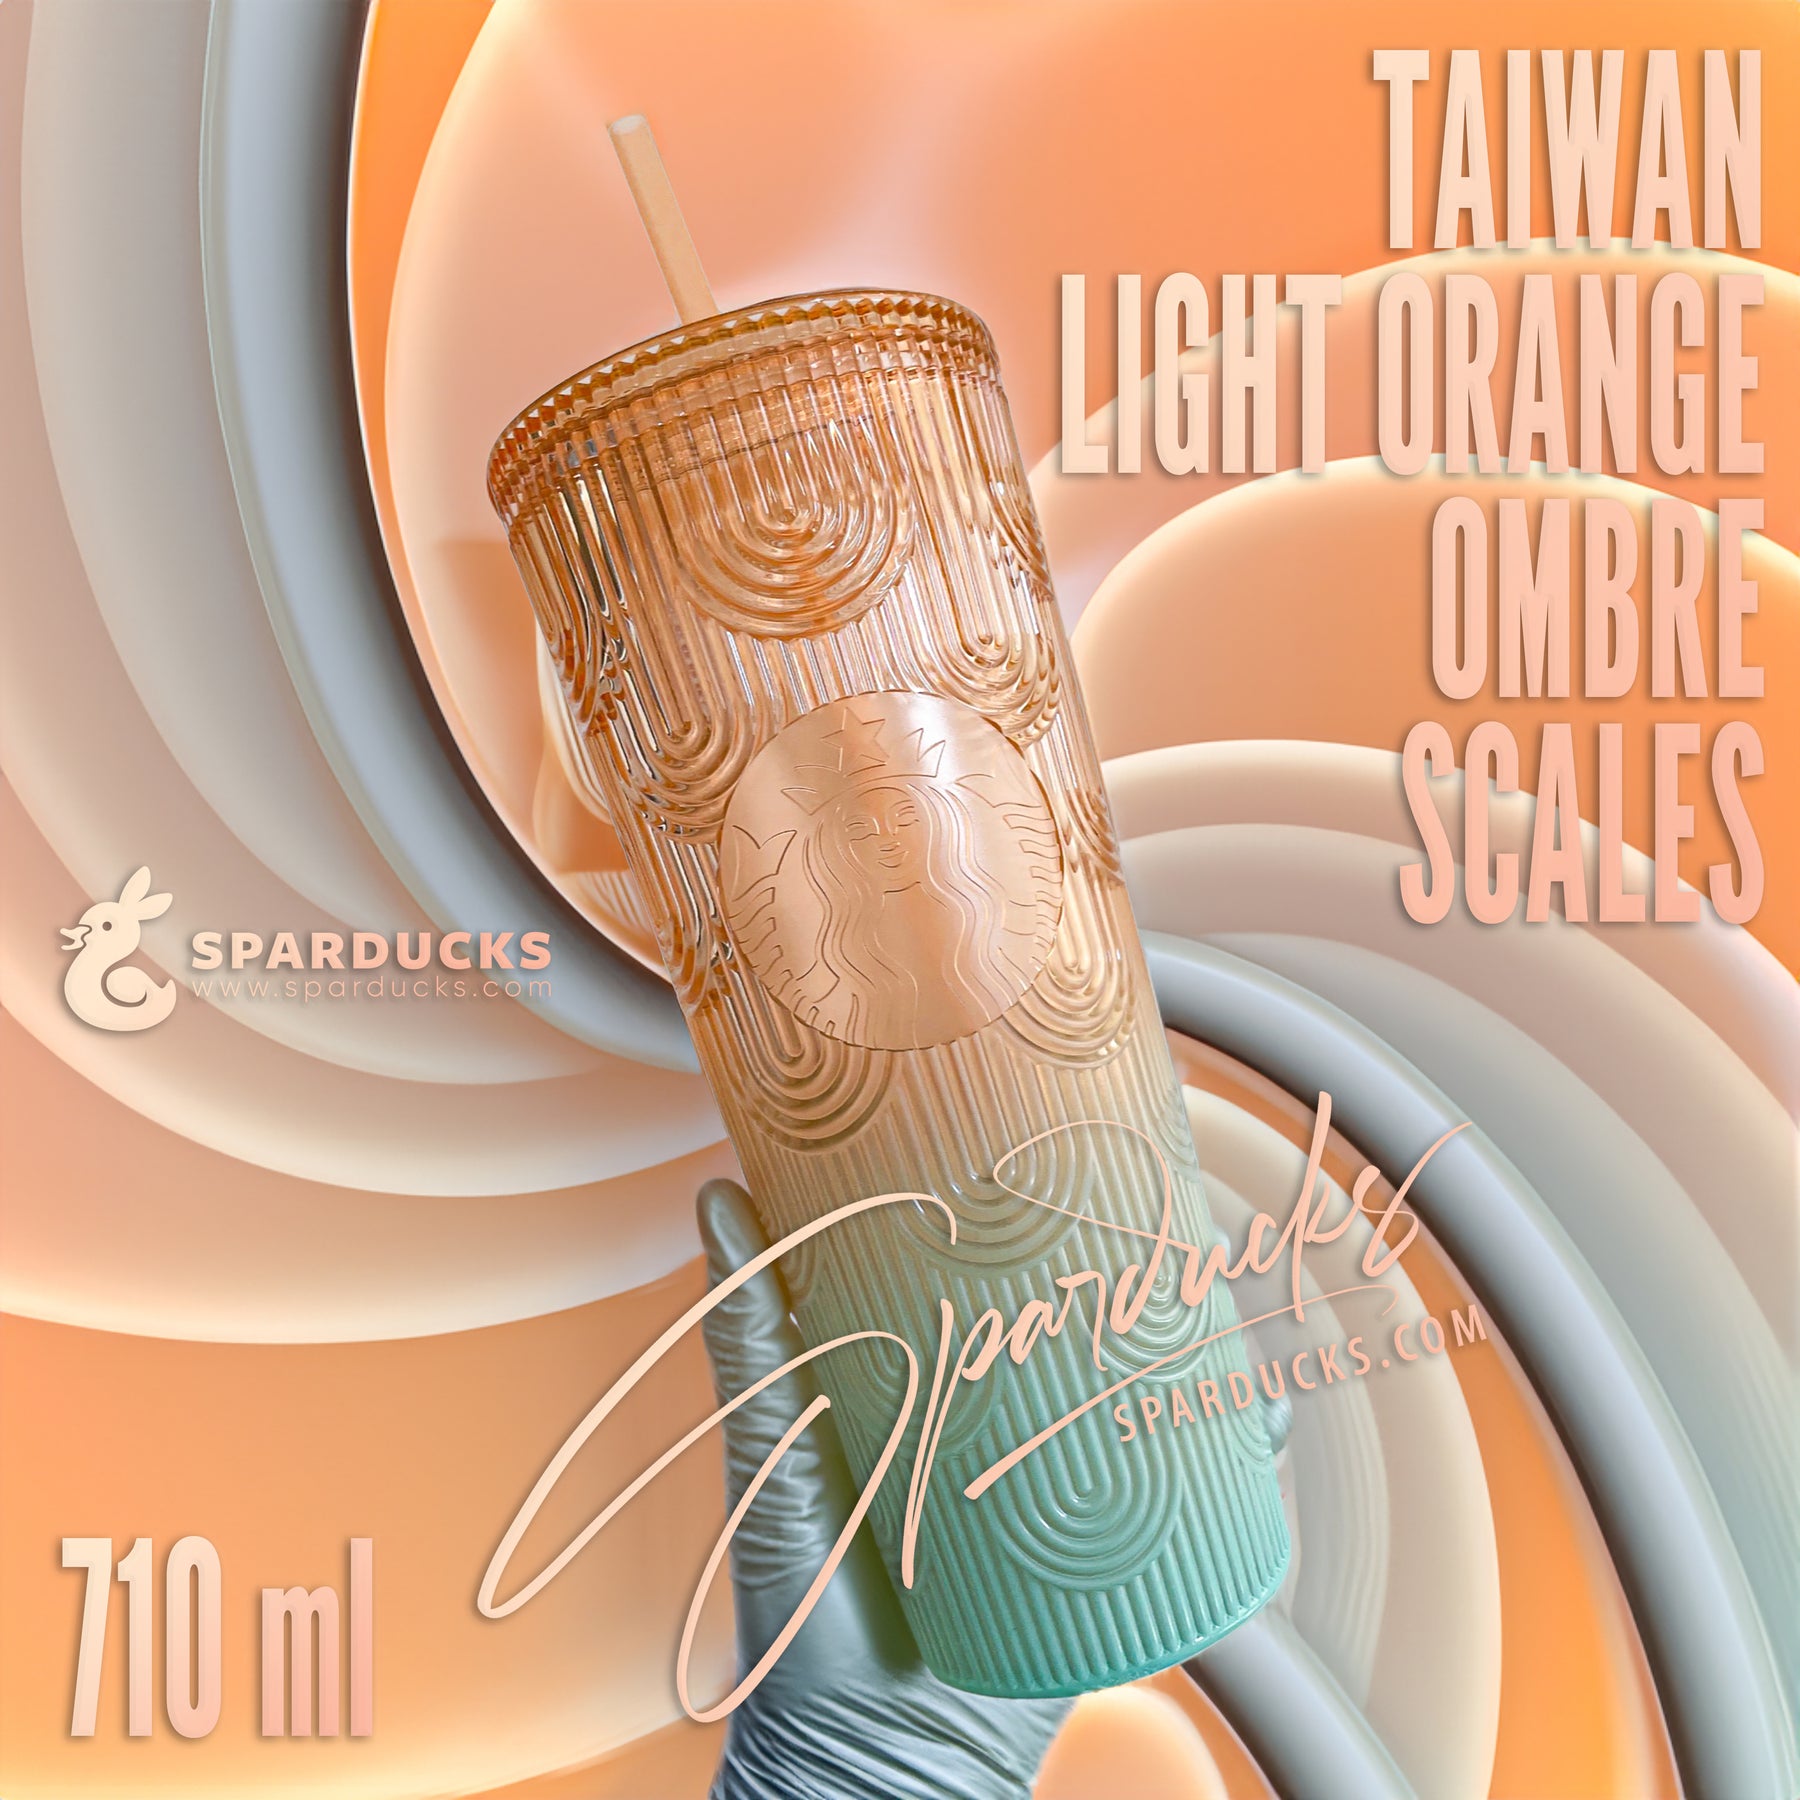 24oz Taiwan Light Orange Ombre Scales Cold Cup